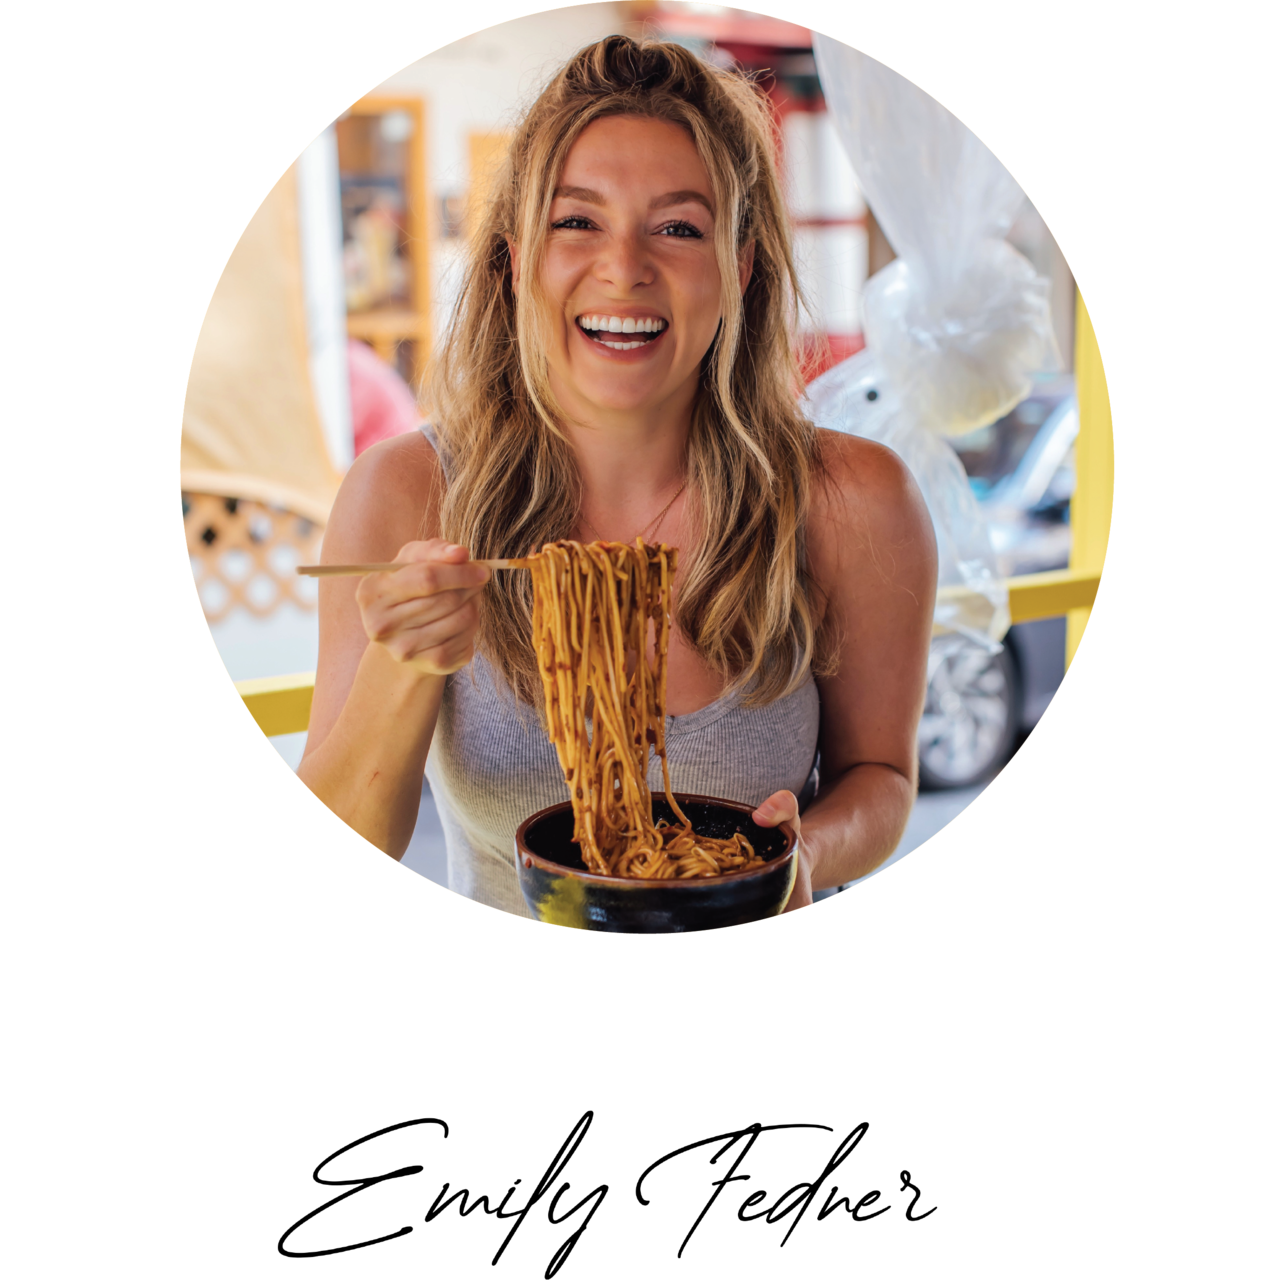 Food Lover's Dispatch